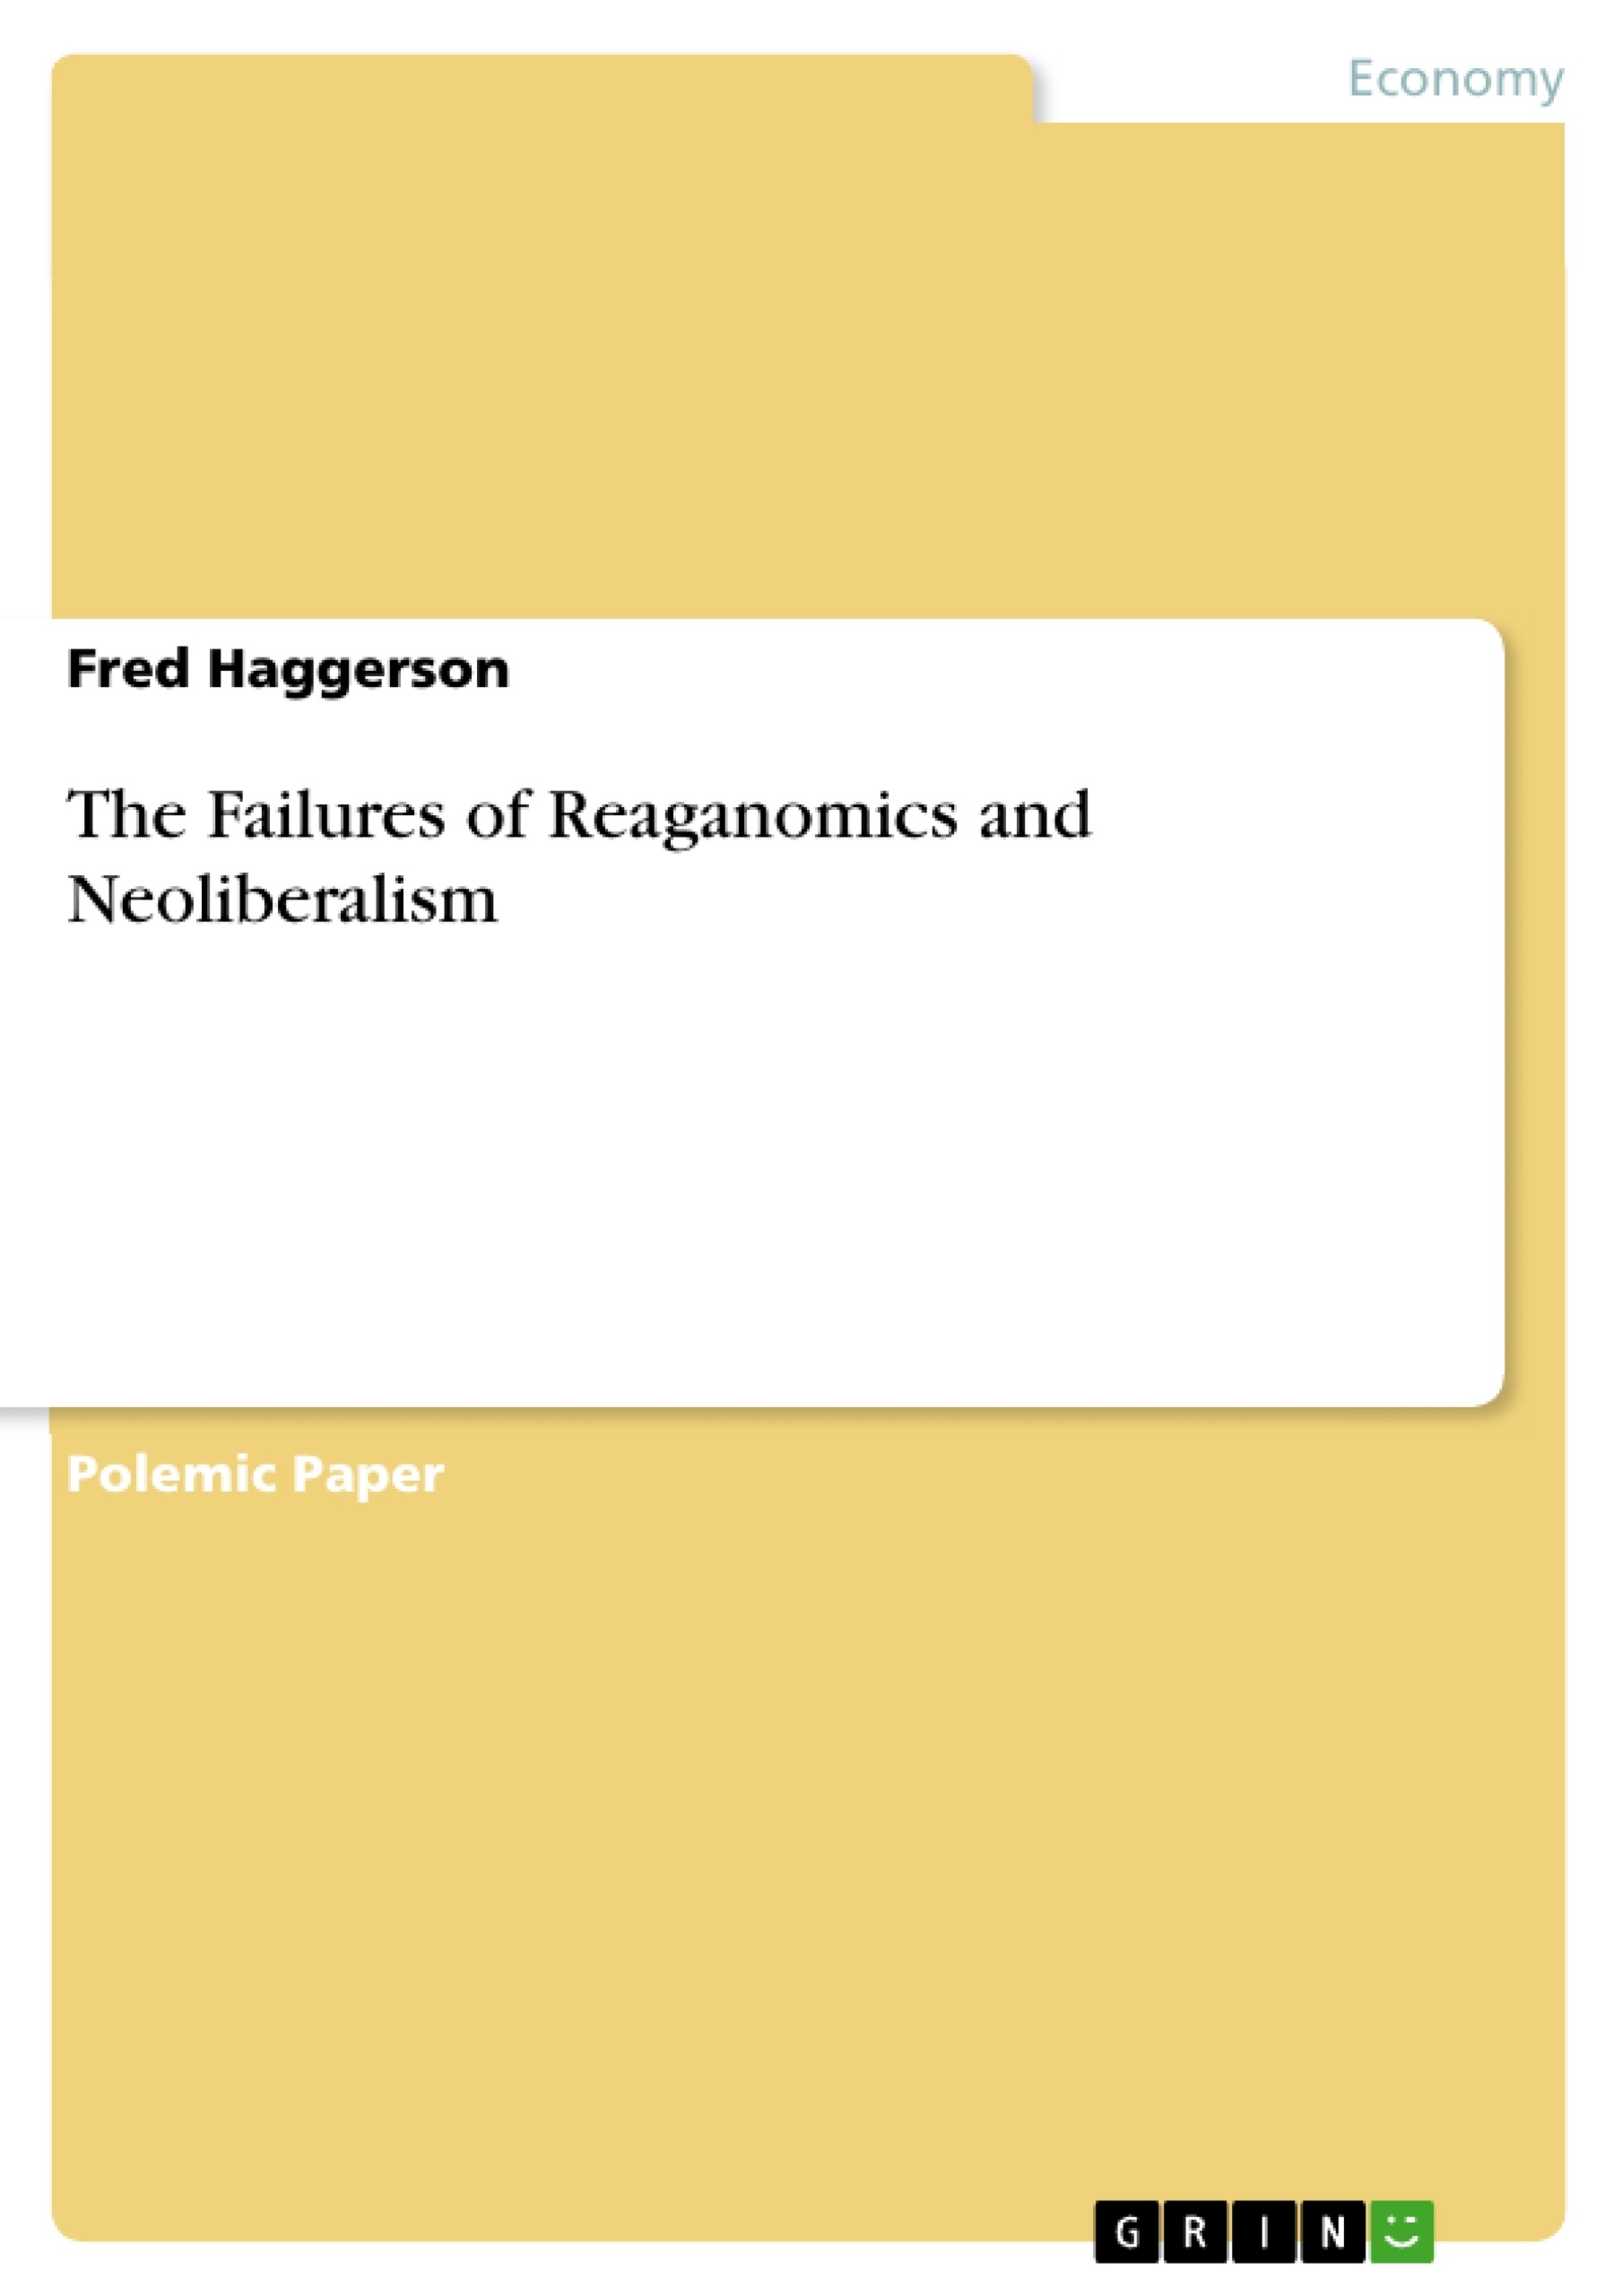 Title: The Failures of Reaganomics and Neoliberalism